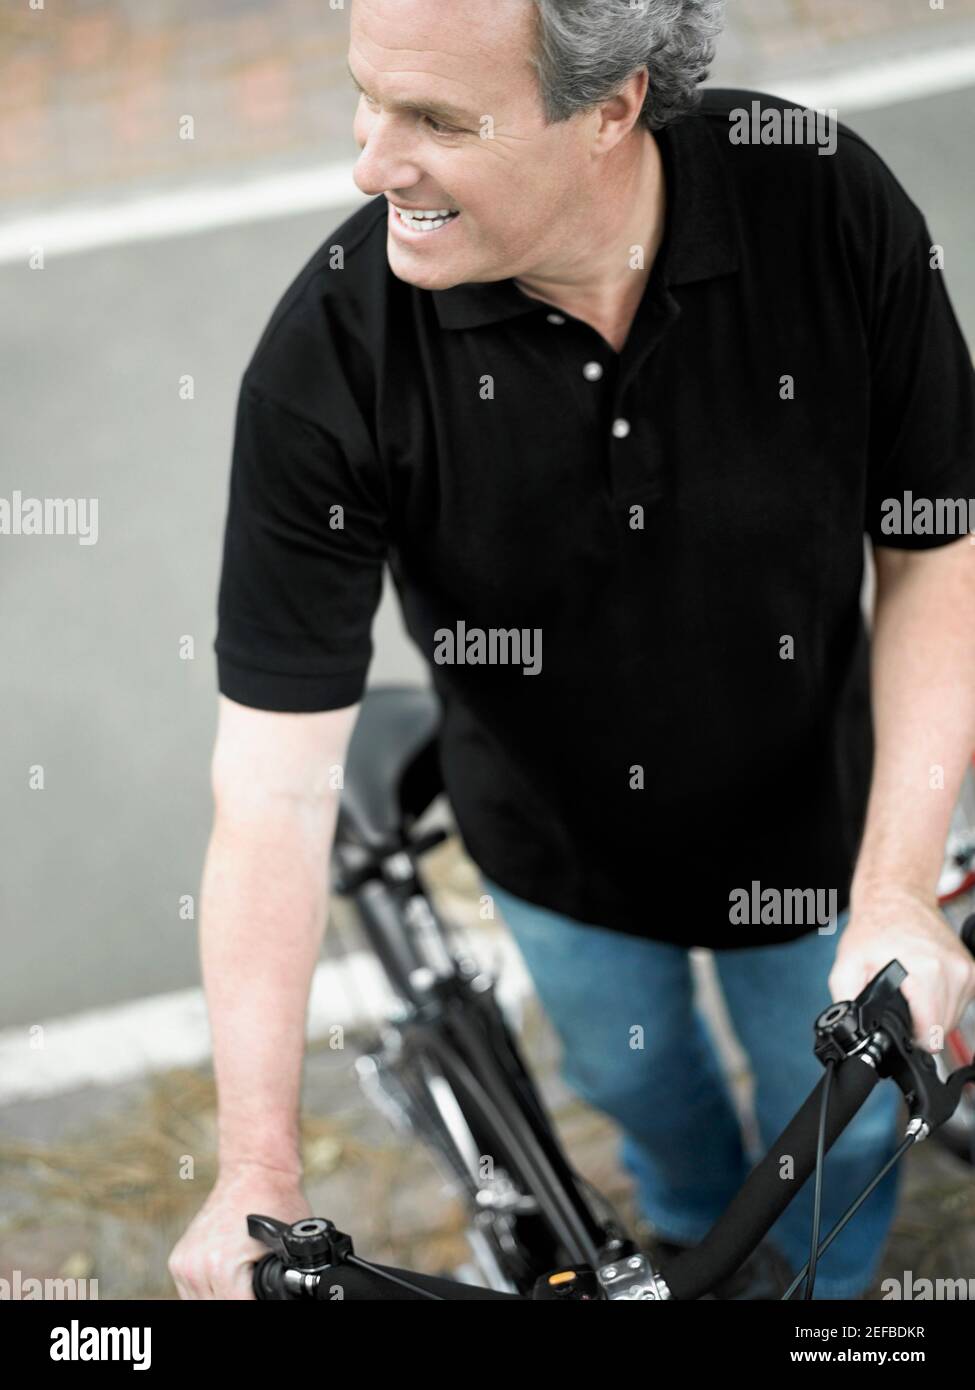 High angle view of a mature man standing with a bicycle and smiling Stock Photo